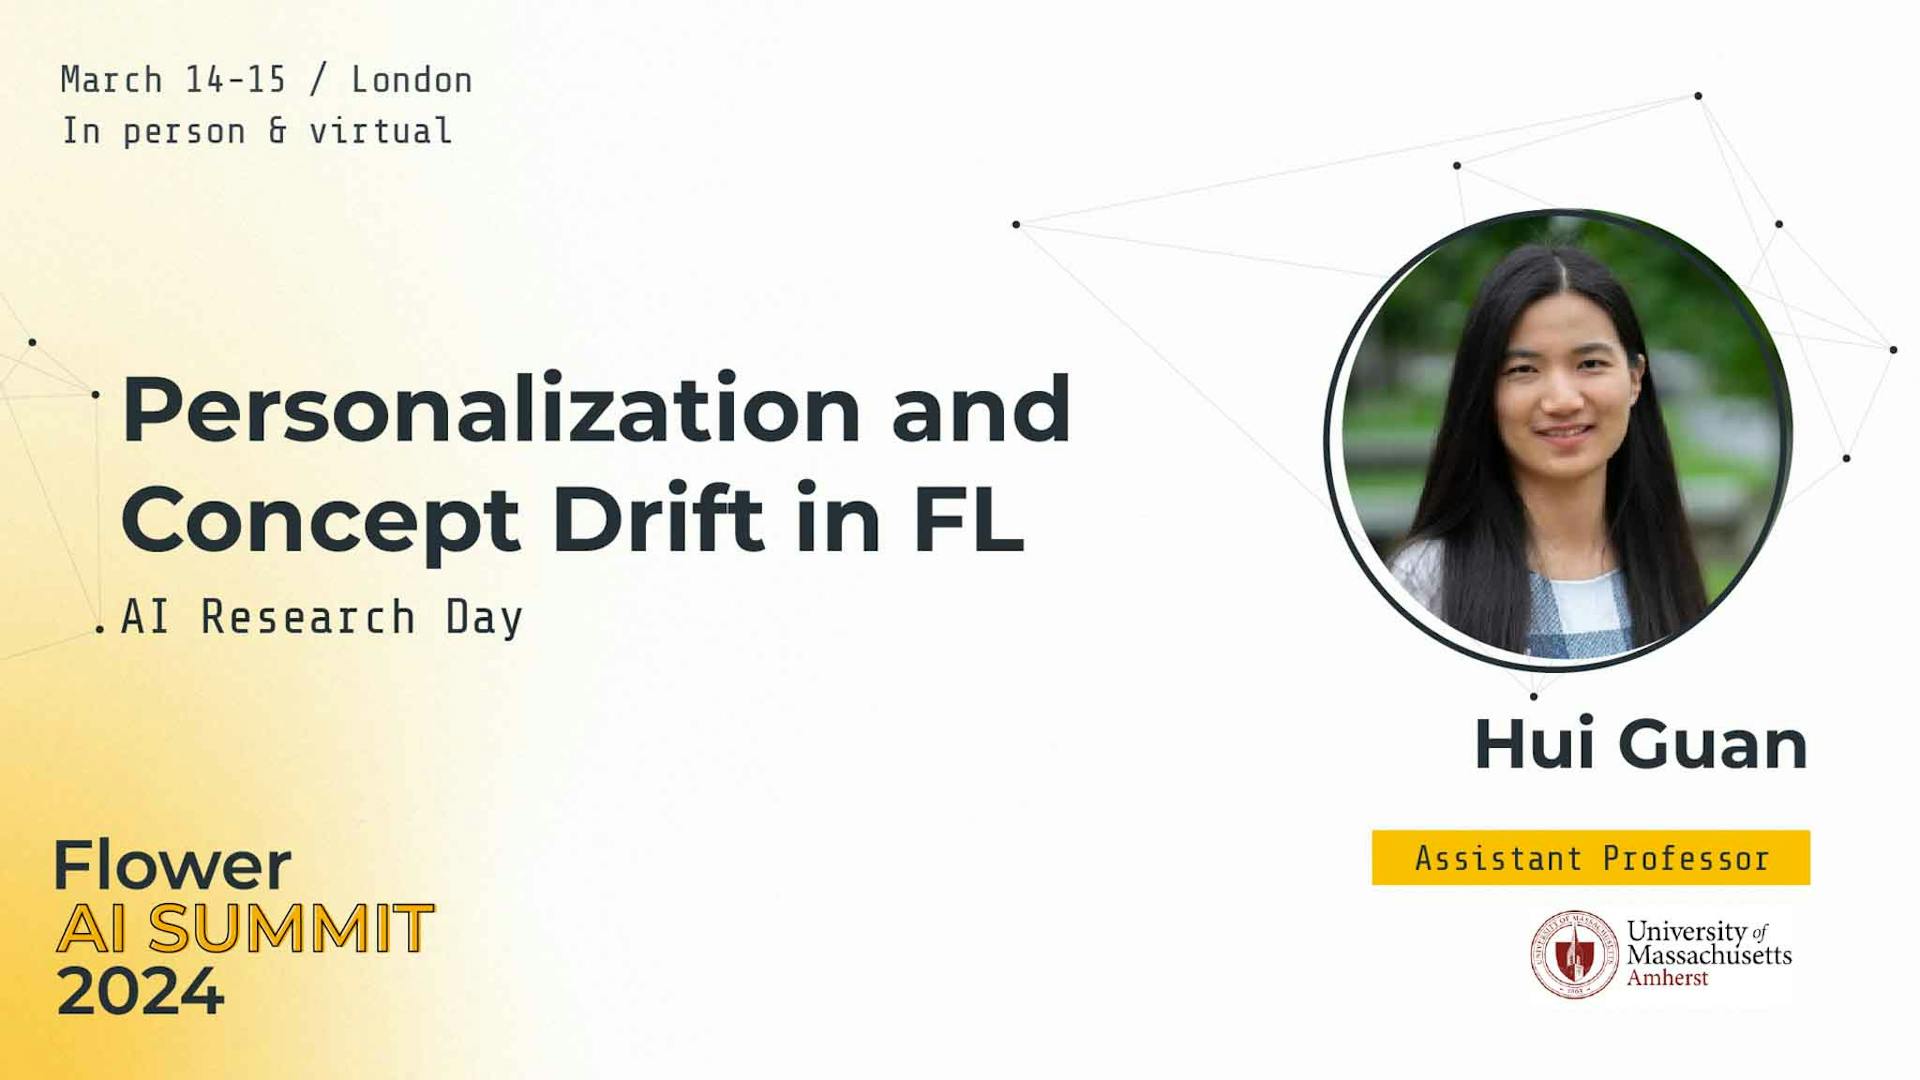 Personalization and Concept Drift in FL, by Hui Guan